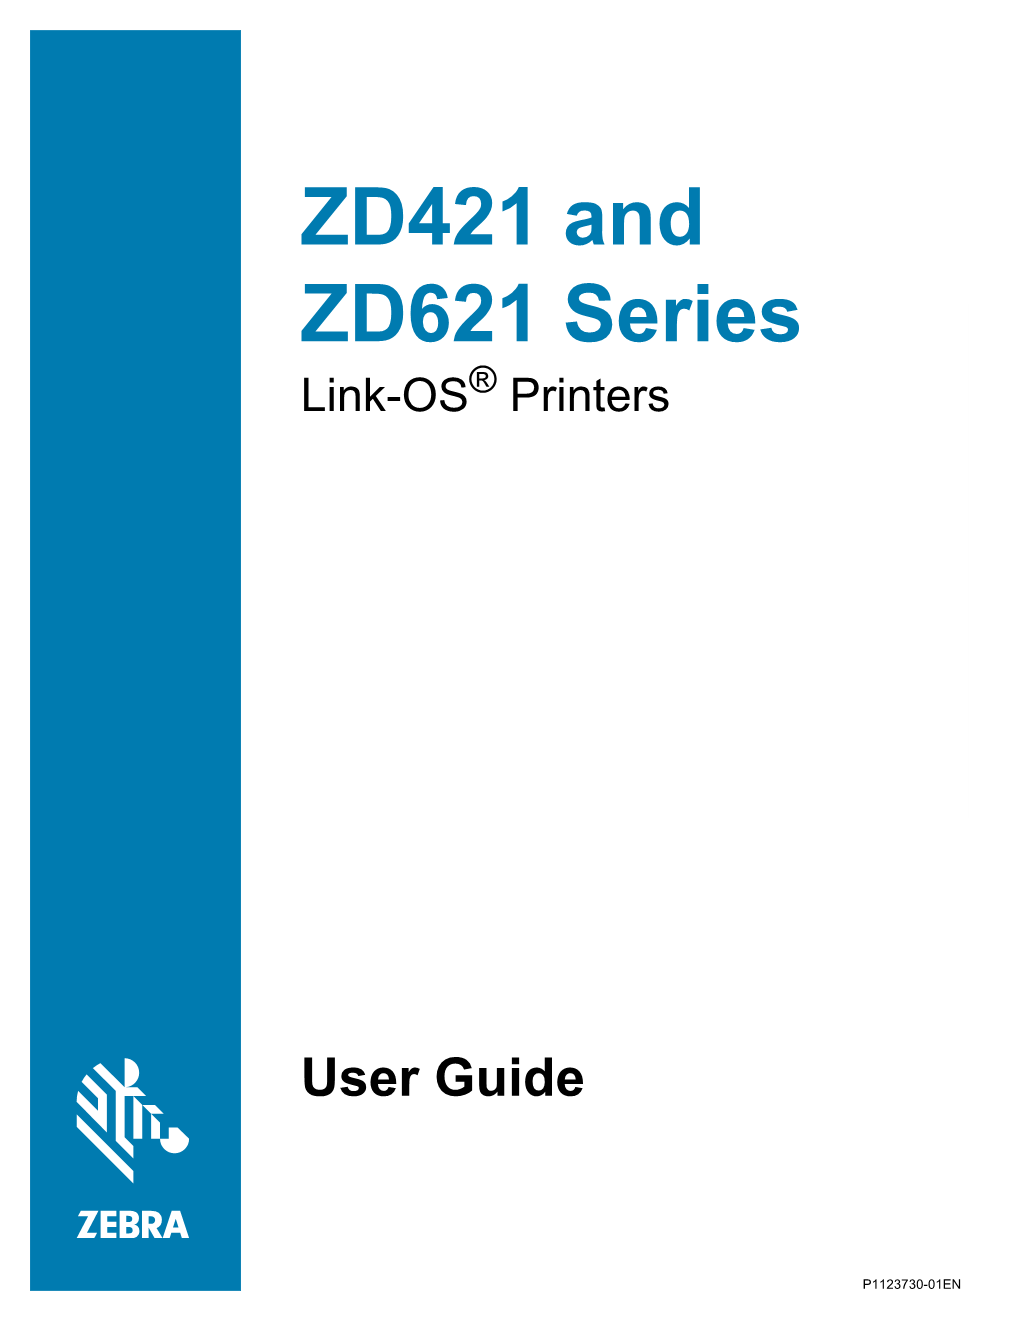 ZD421 and ZD621 Users Guide (En)